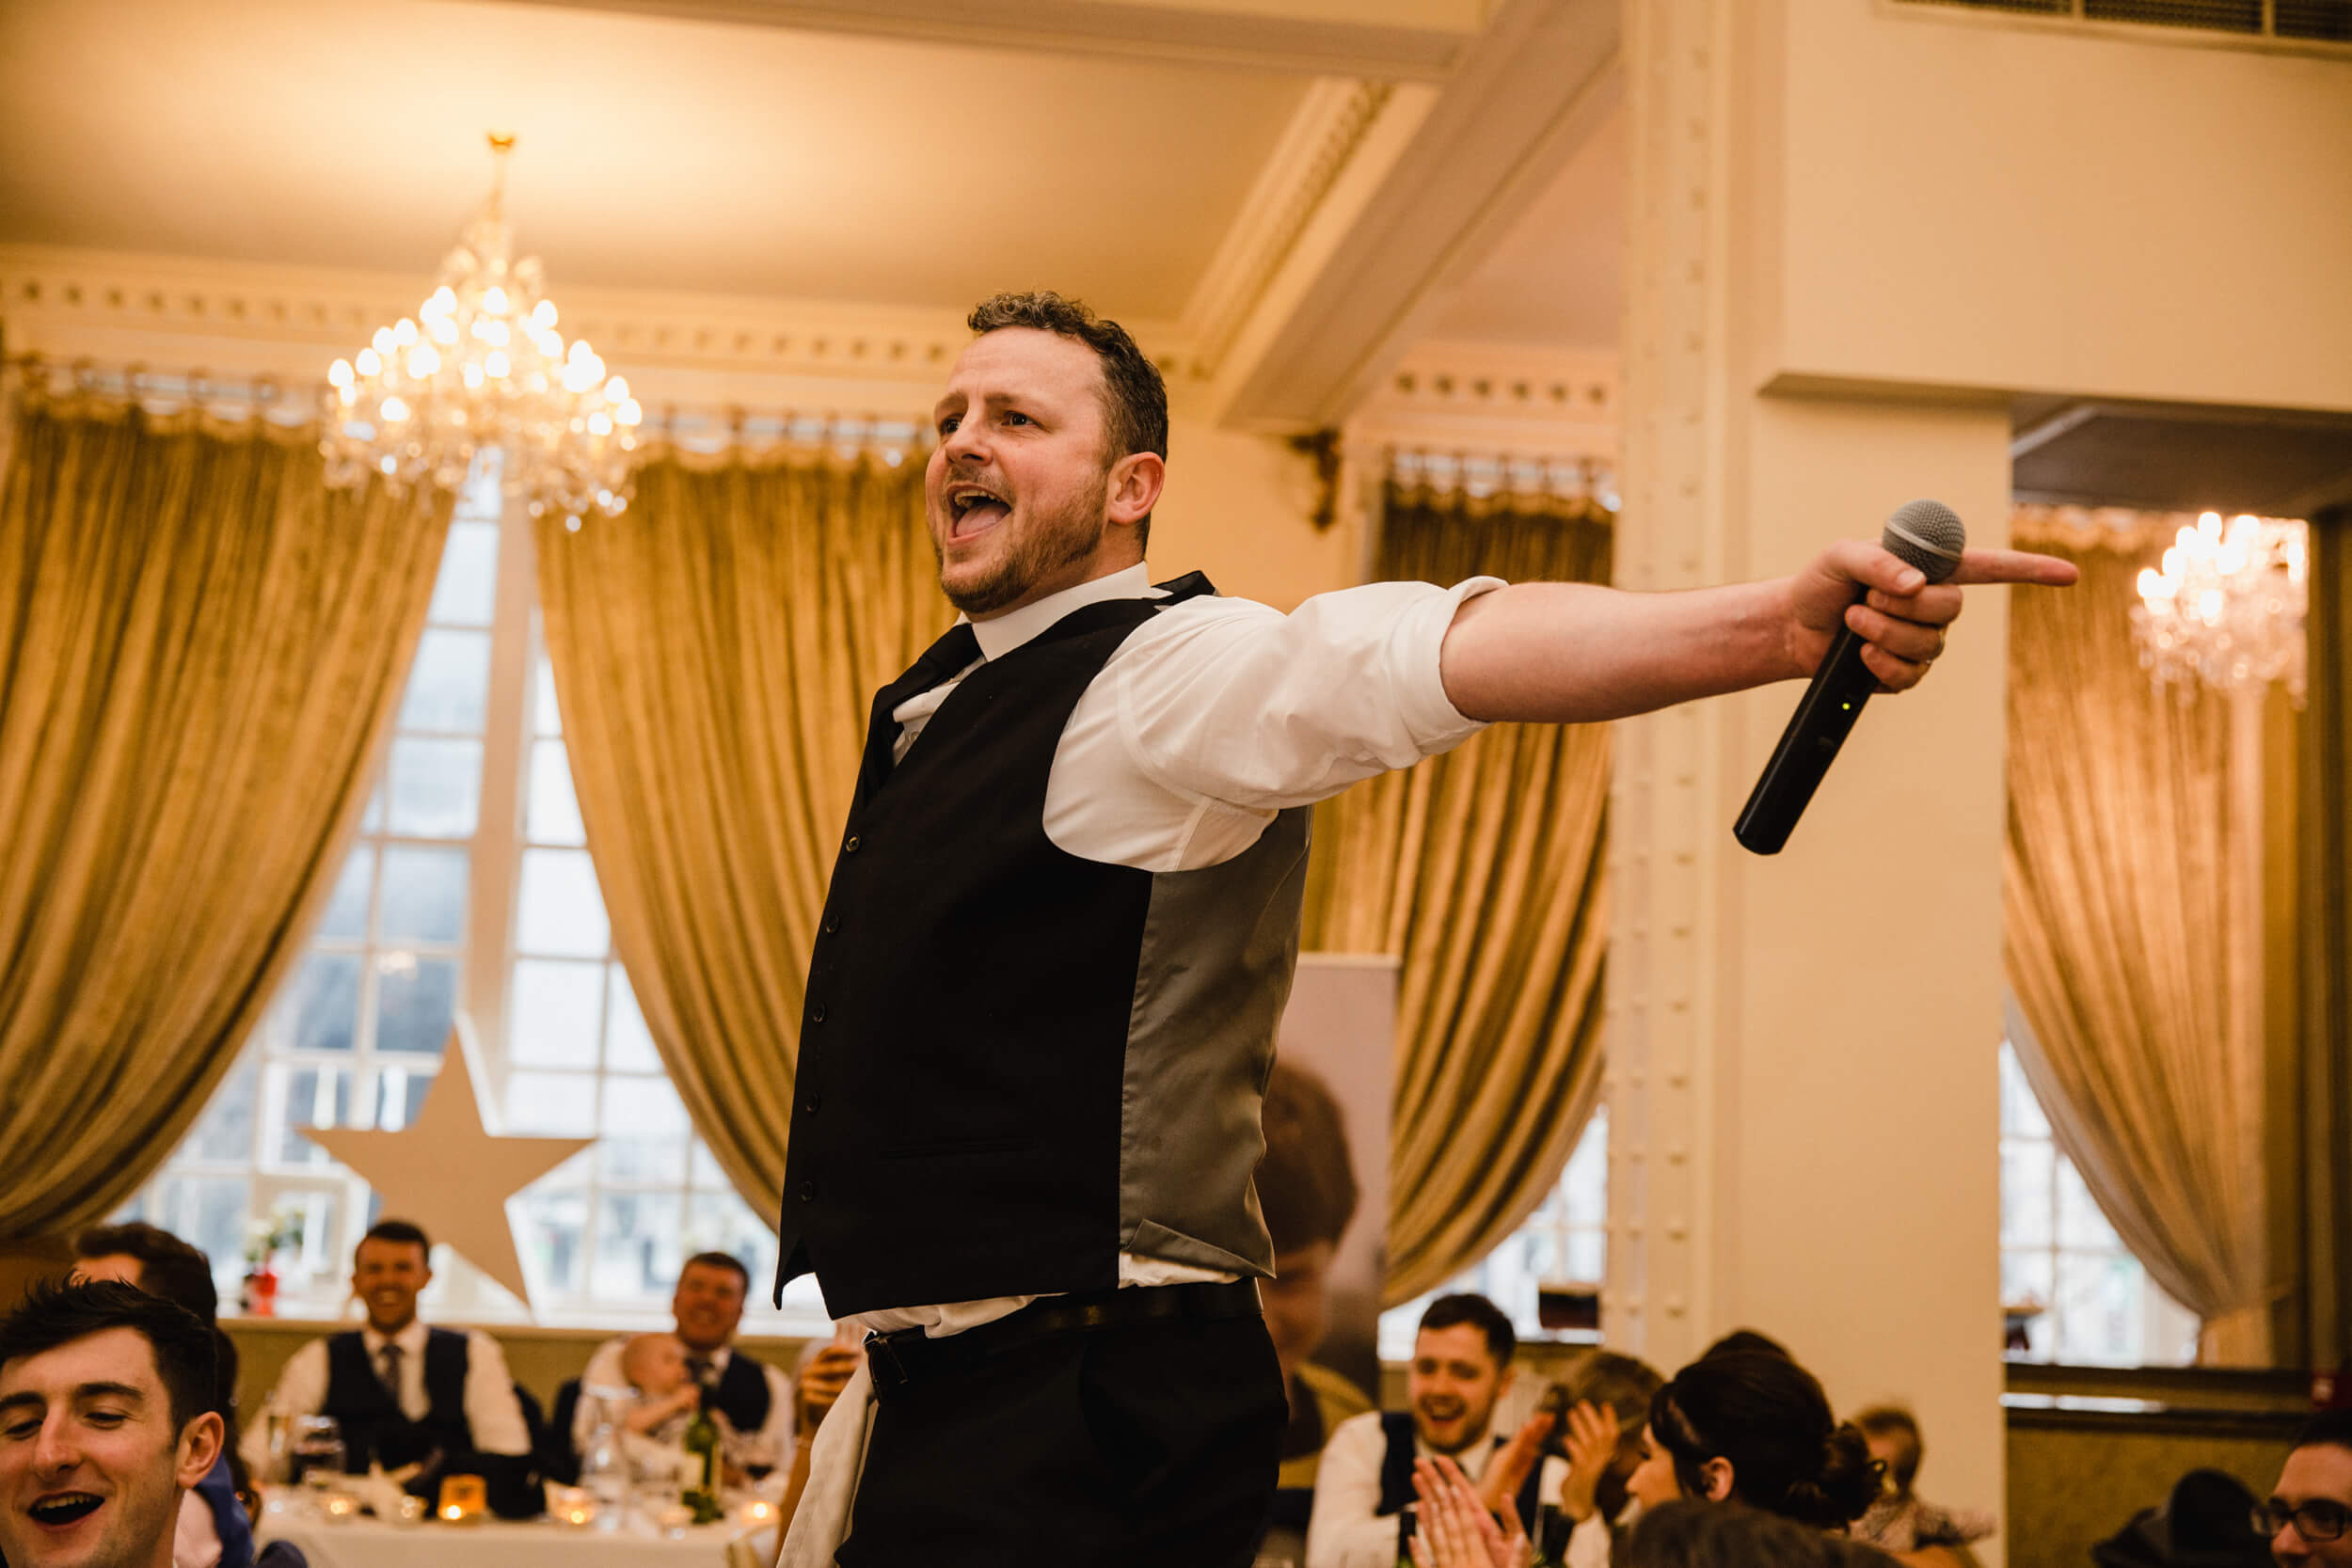 silver service singing waiters provide entertainment for wedding party